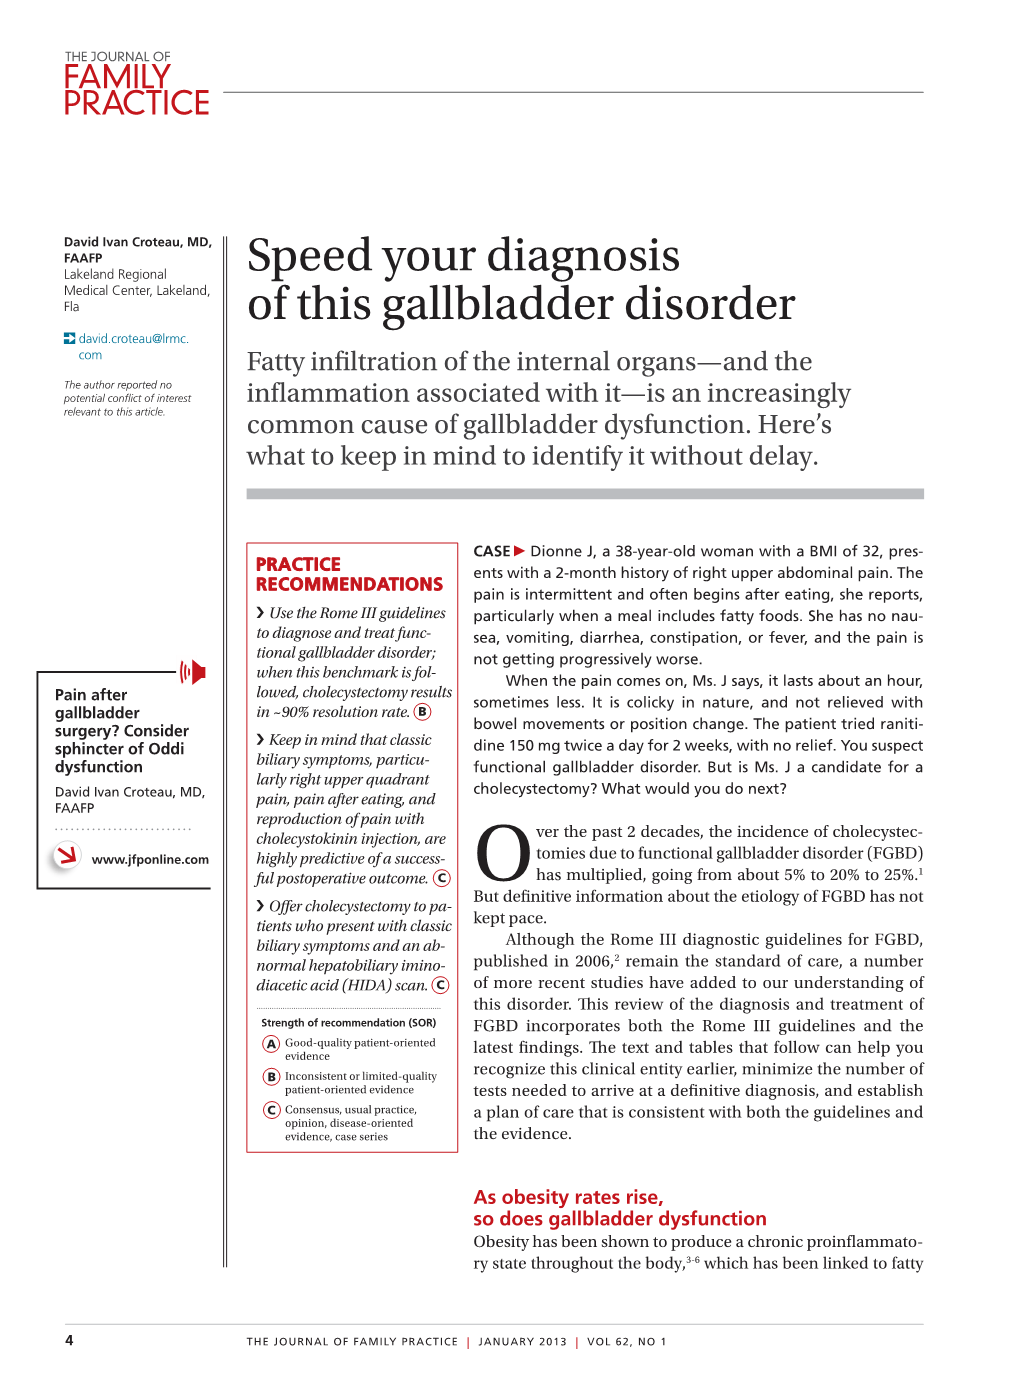 Speed Your Diagnosis of This Gallbladder Disorder